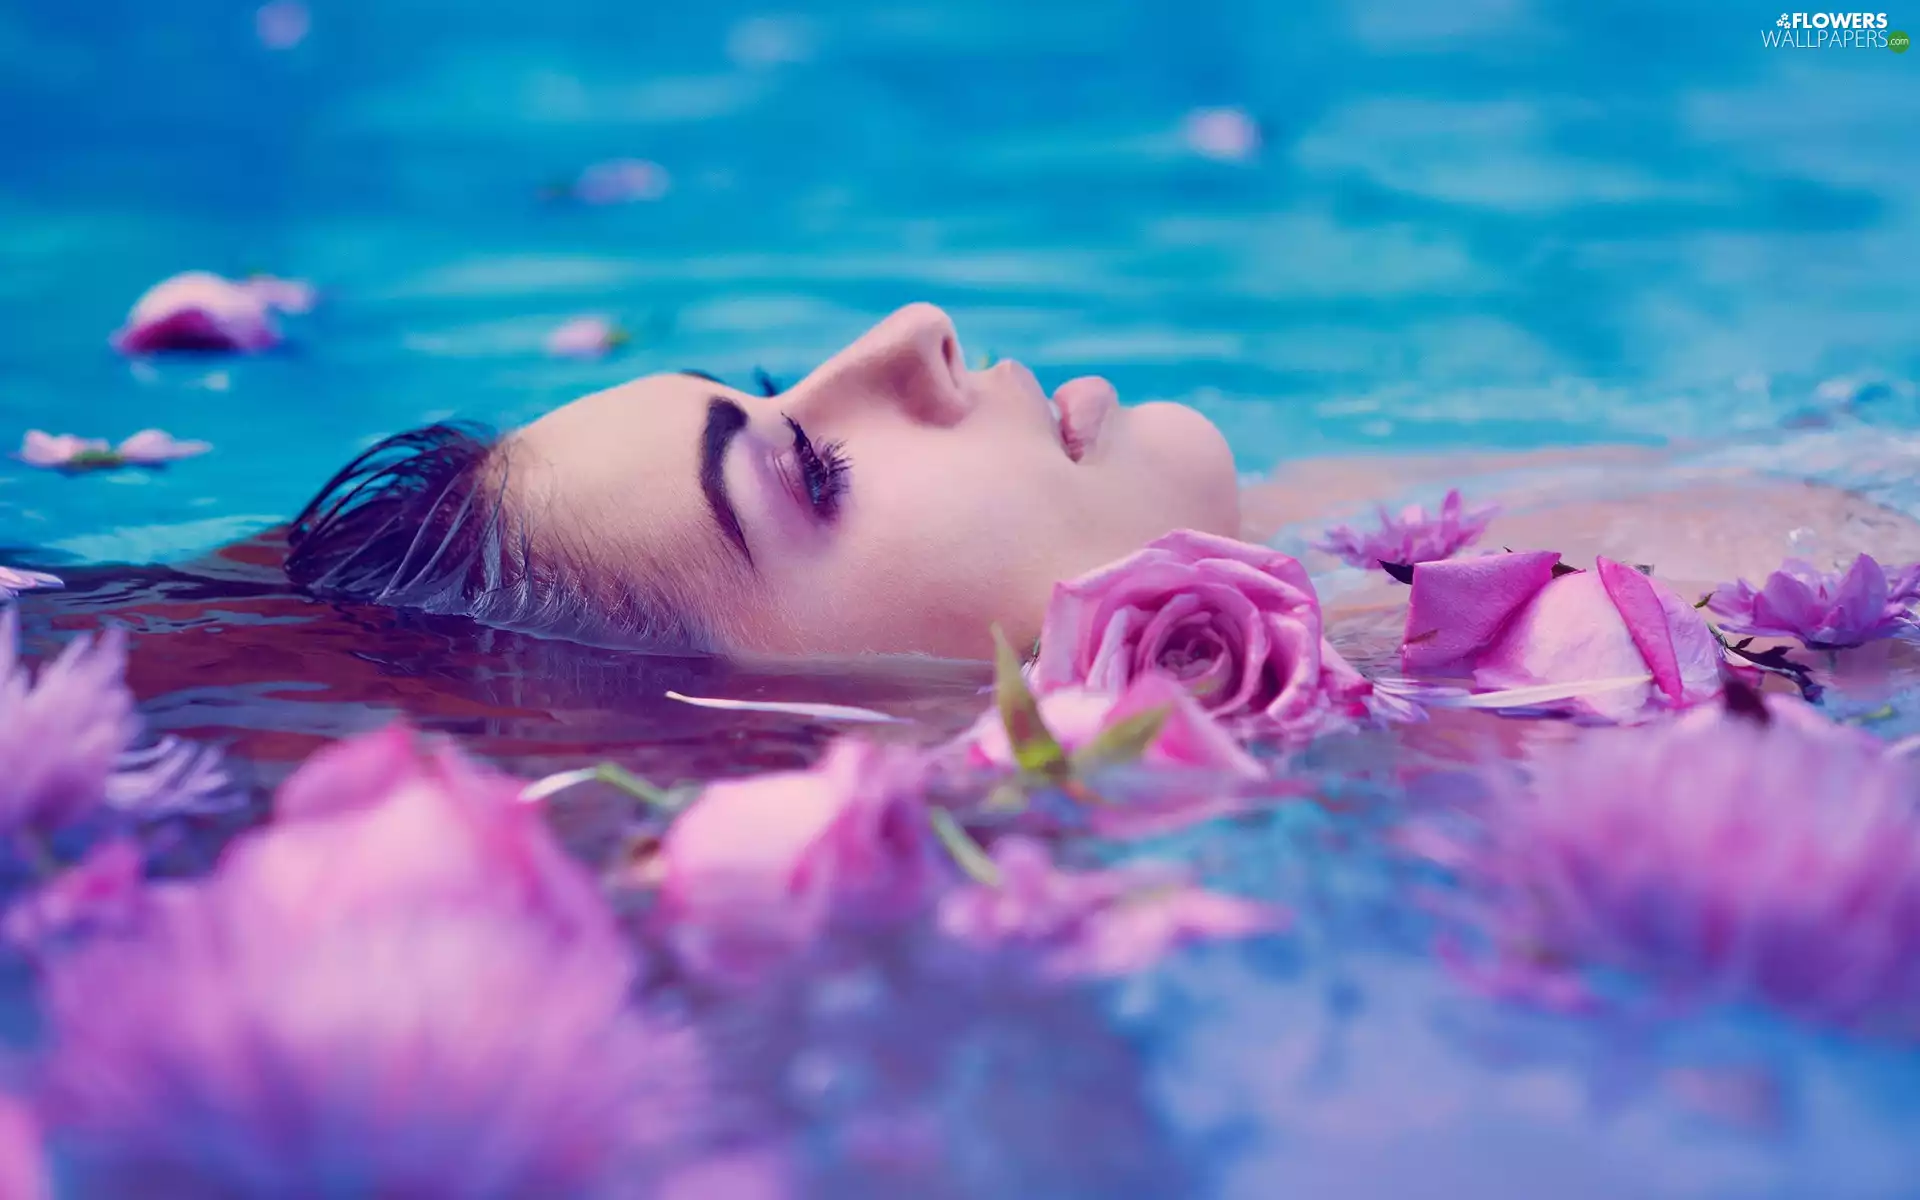 Women, roses, relaxation, water